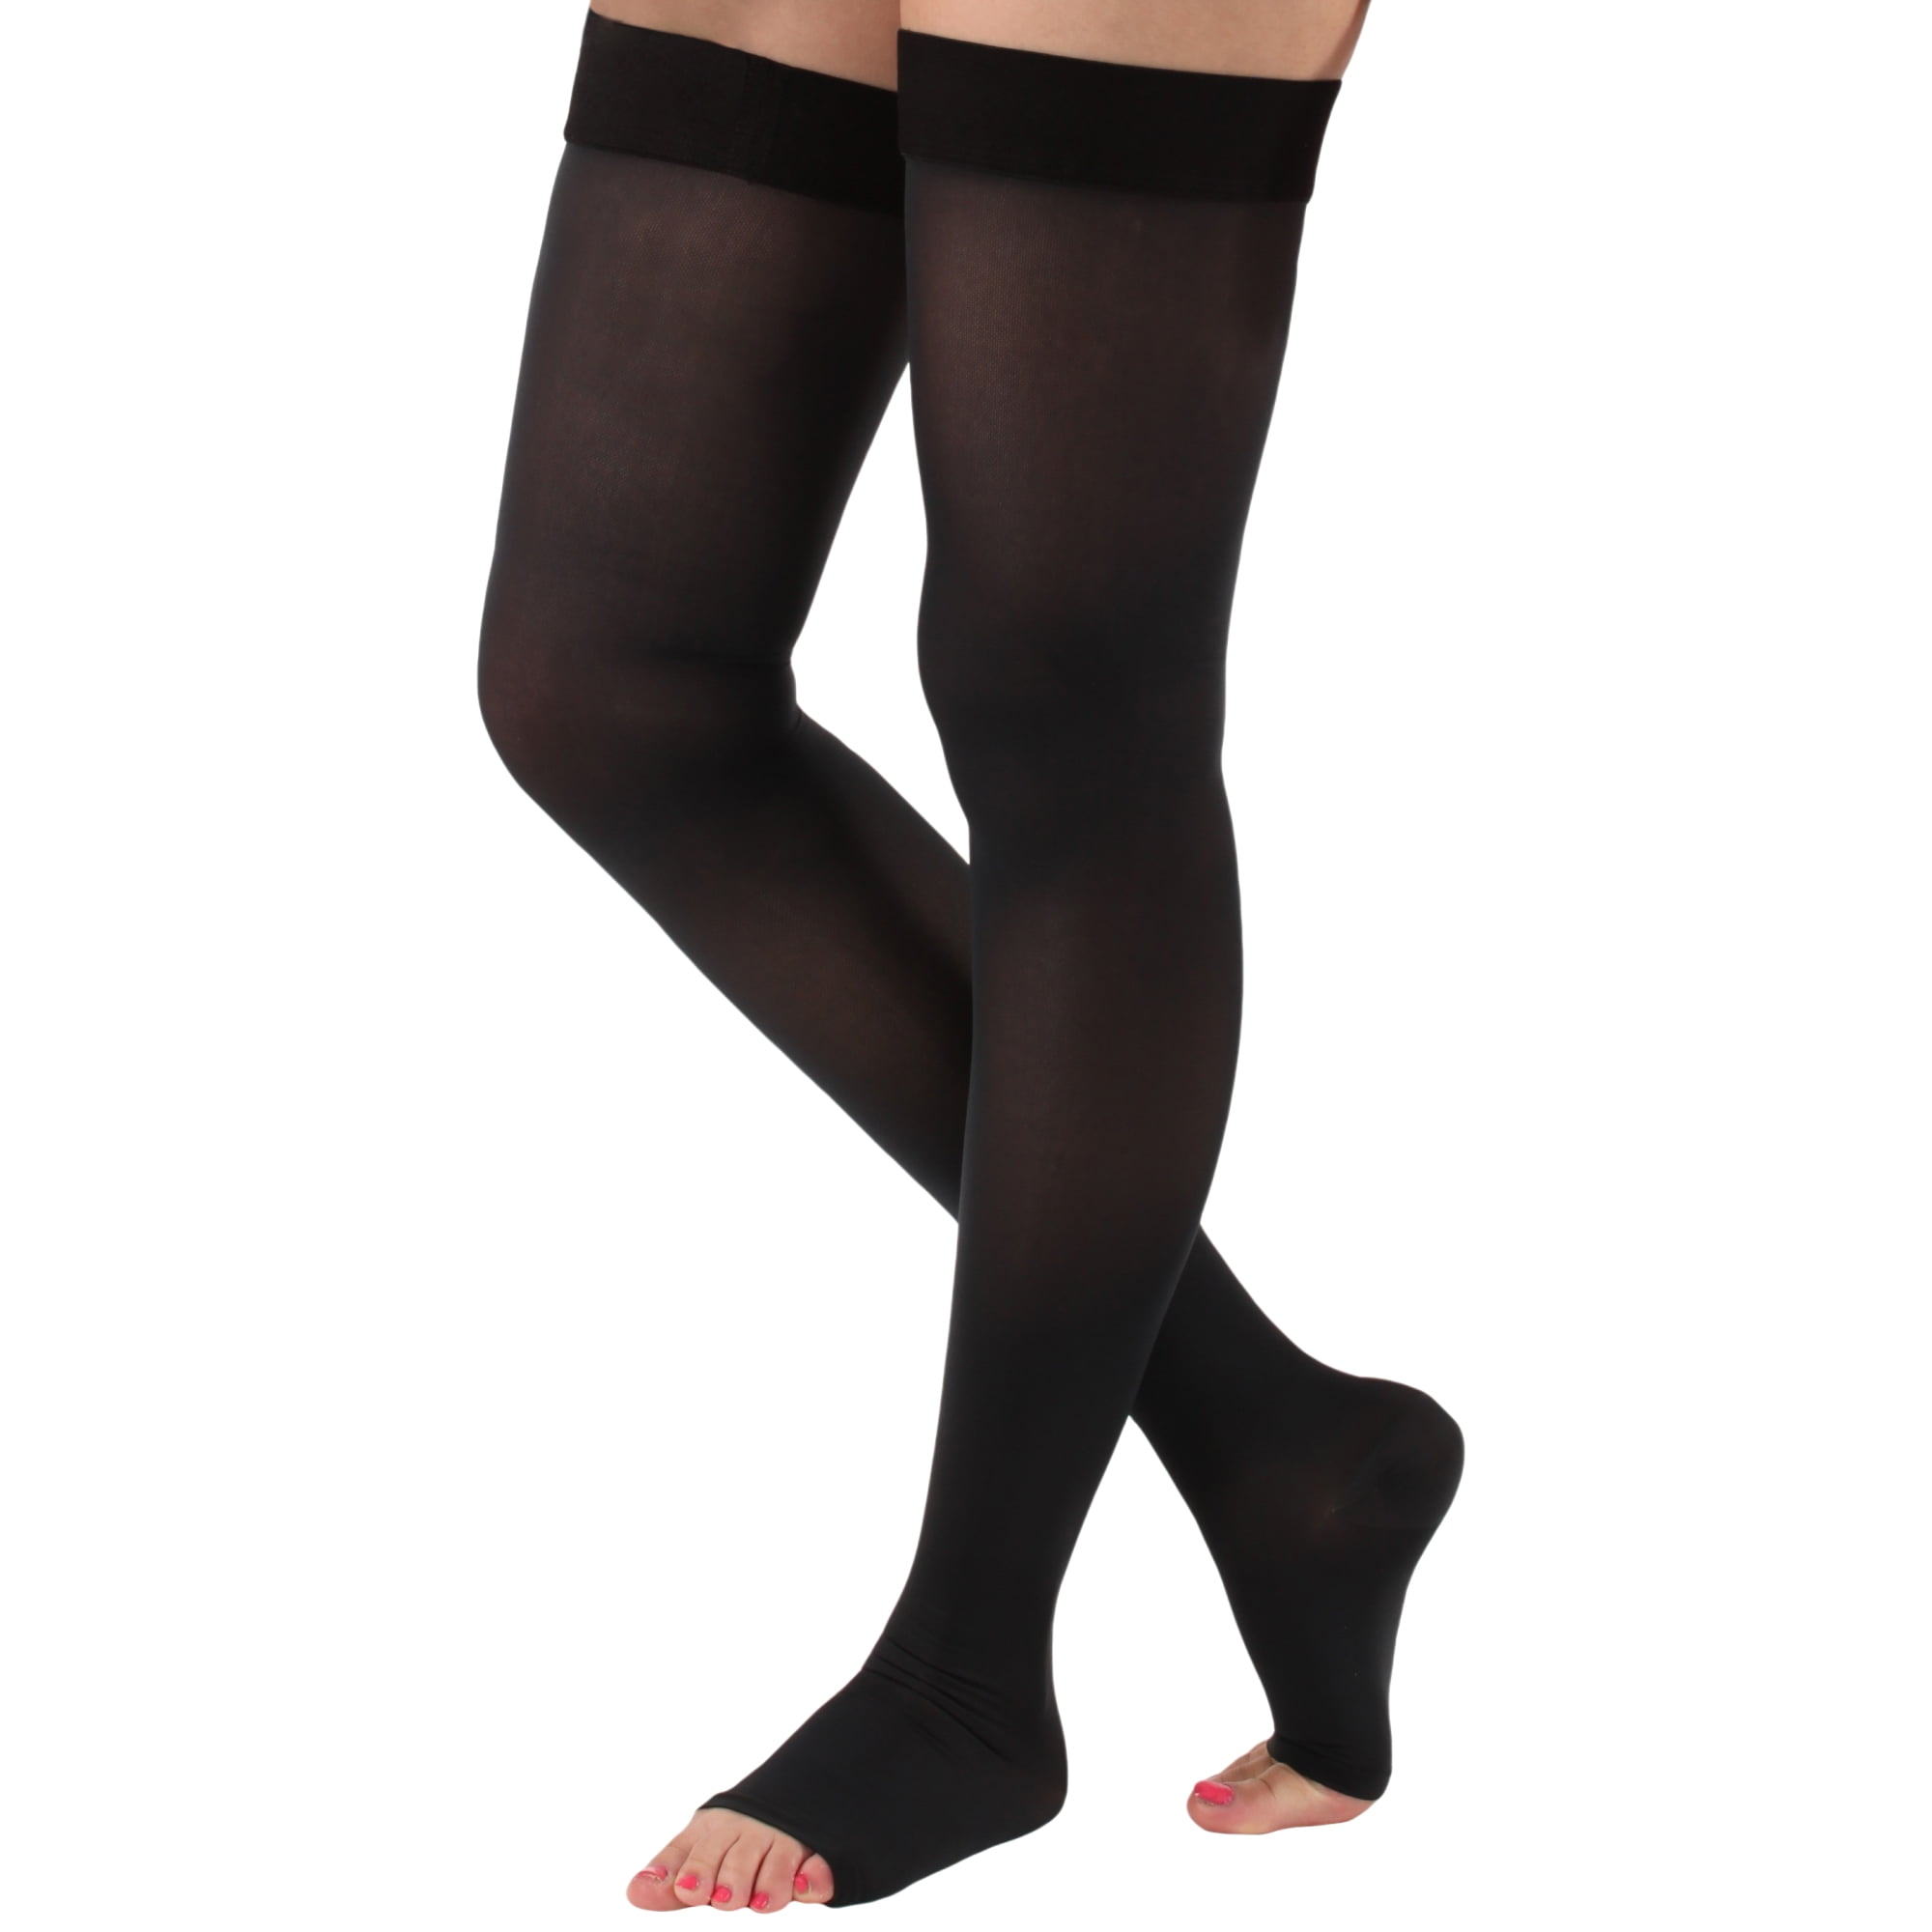 Absolute Support Opaque Medical Compression Pantyhose – X-Firm